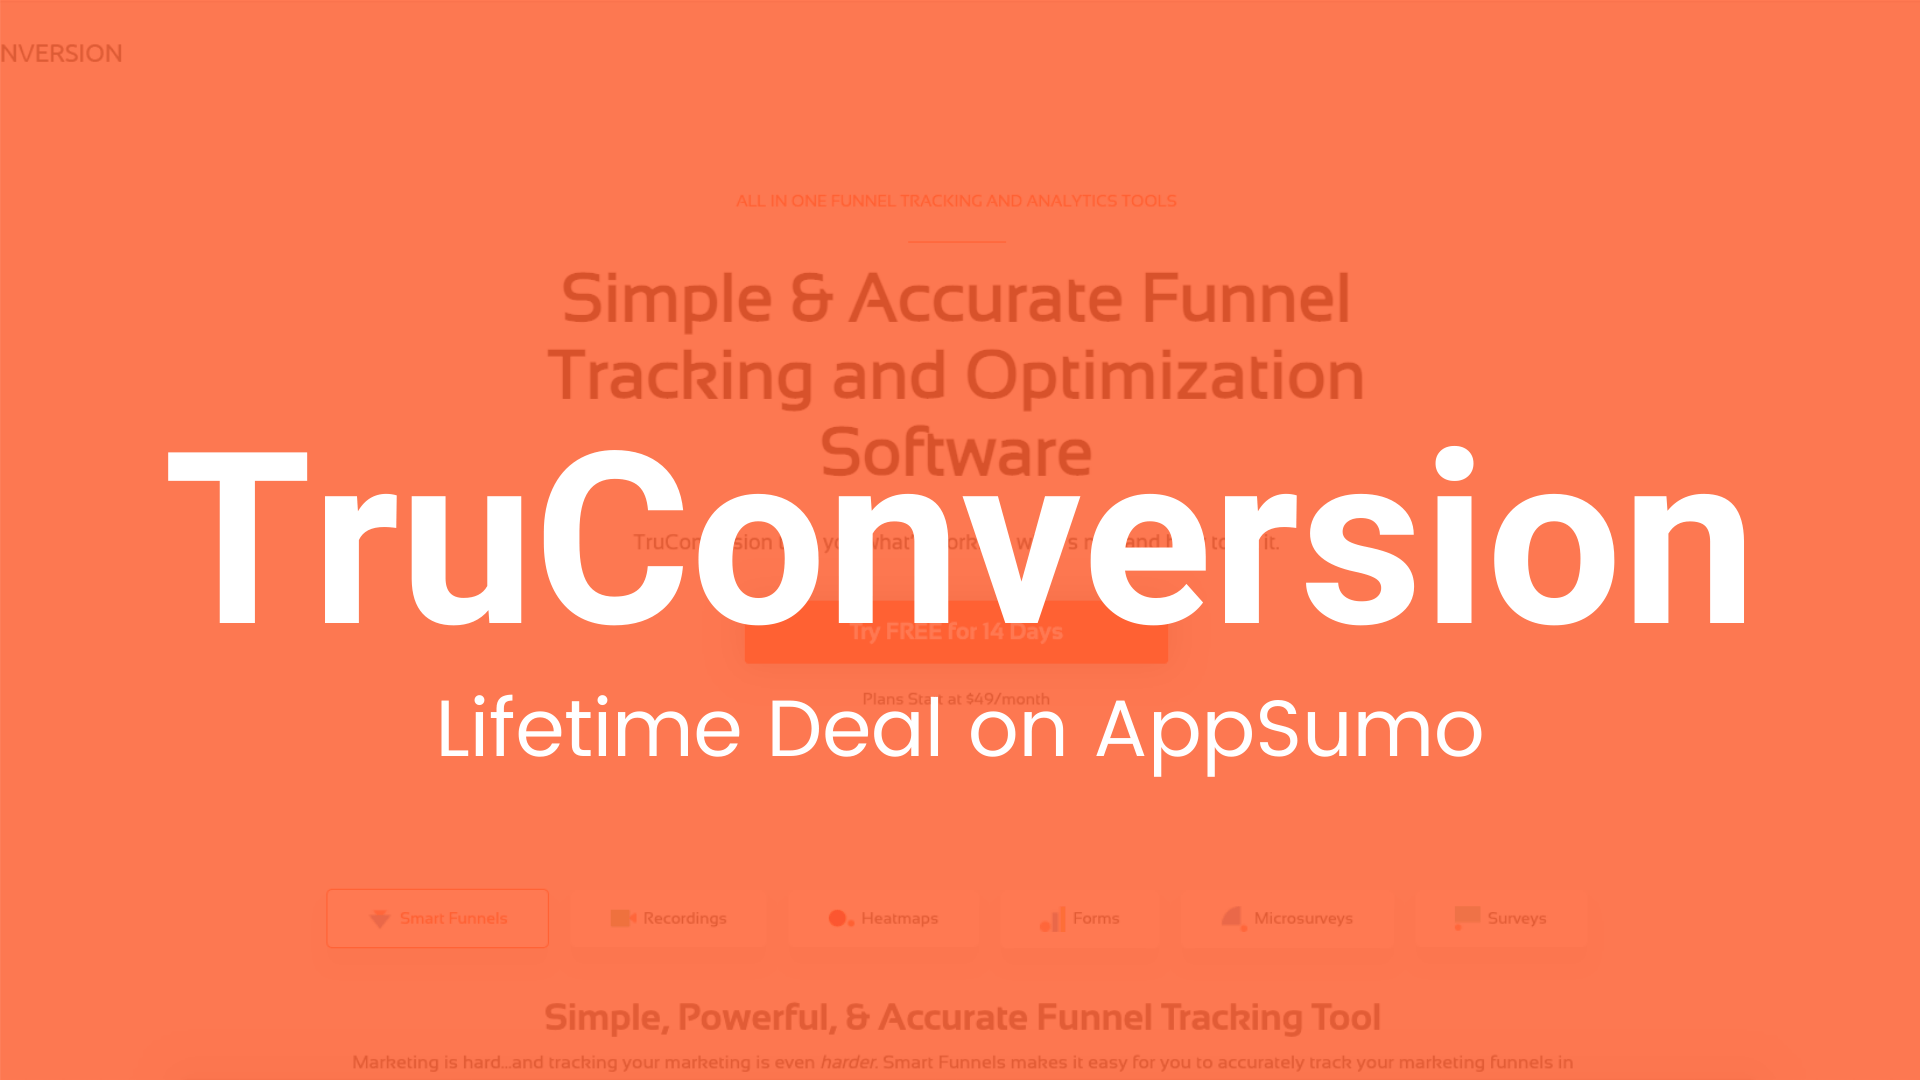 TruConversion: Easiest Funnel Tracking and Optimization Tool